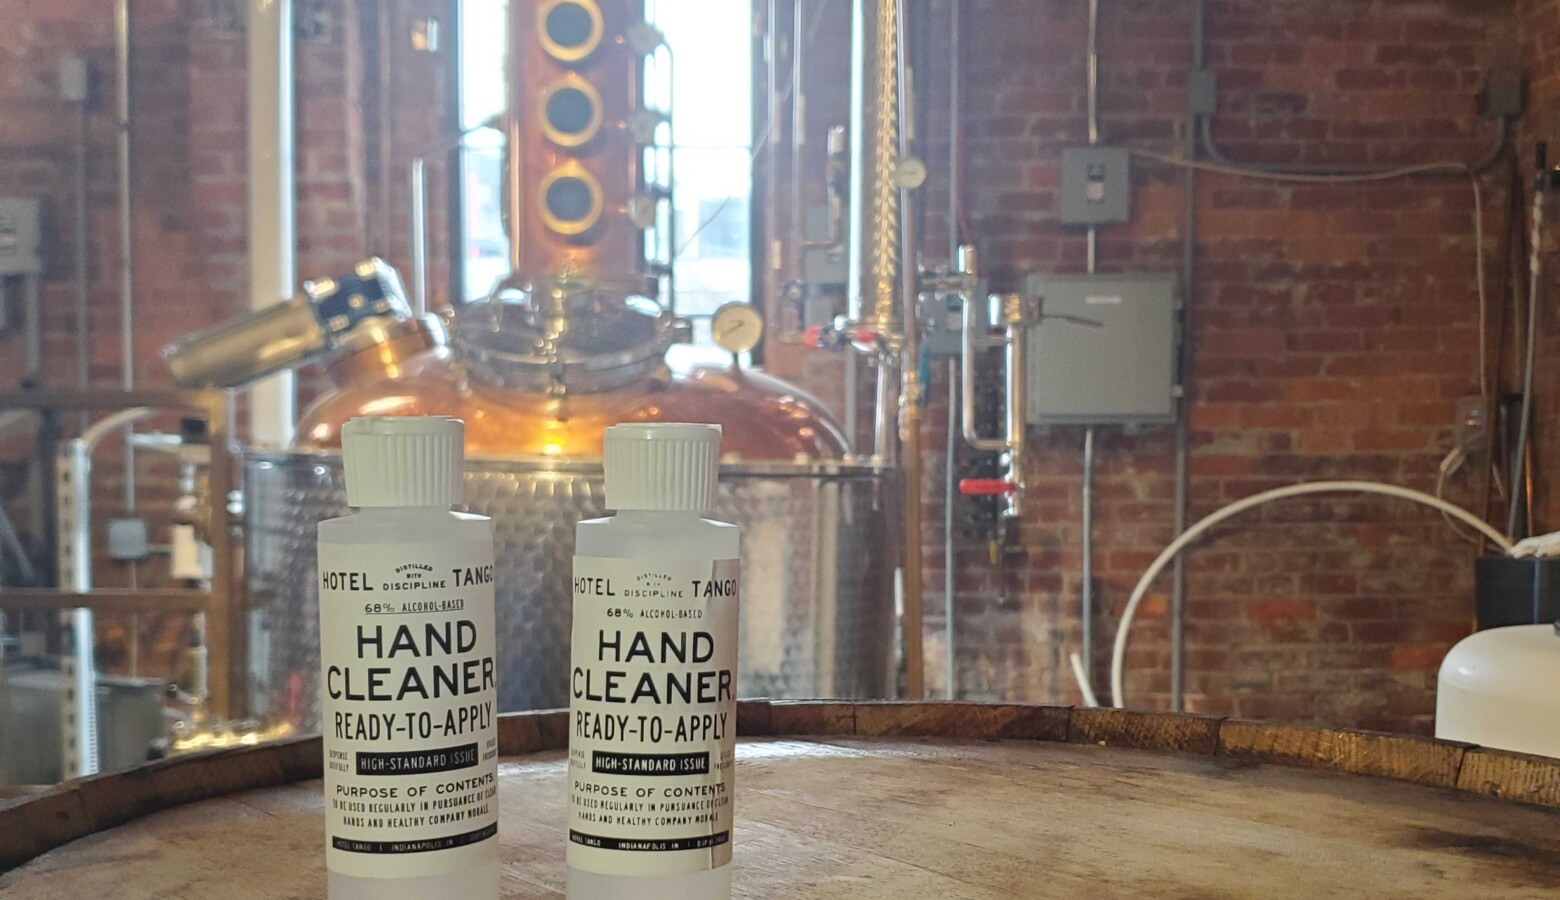 Hotel Tango Distillery has produced hand cleaner in response to the shortages of hand sanitizer. (Samantha Horton/IPB News)